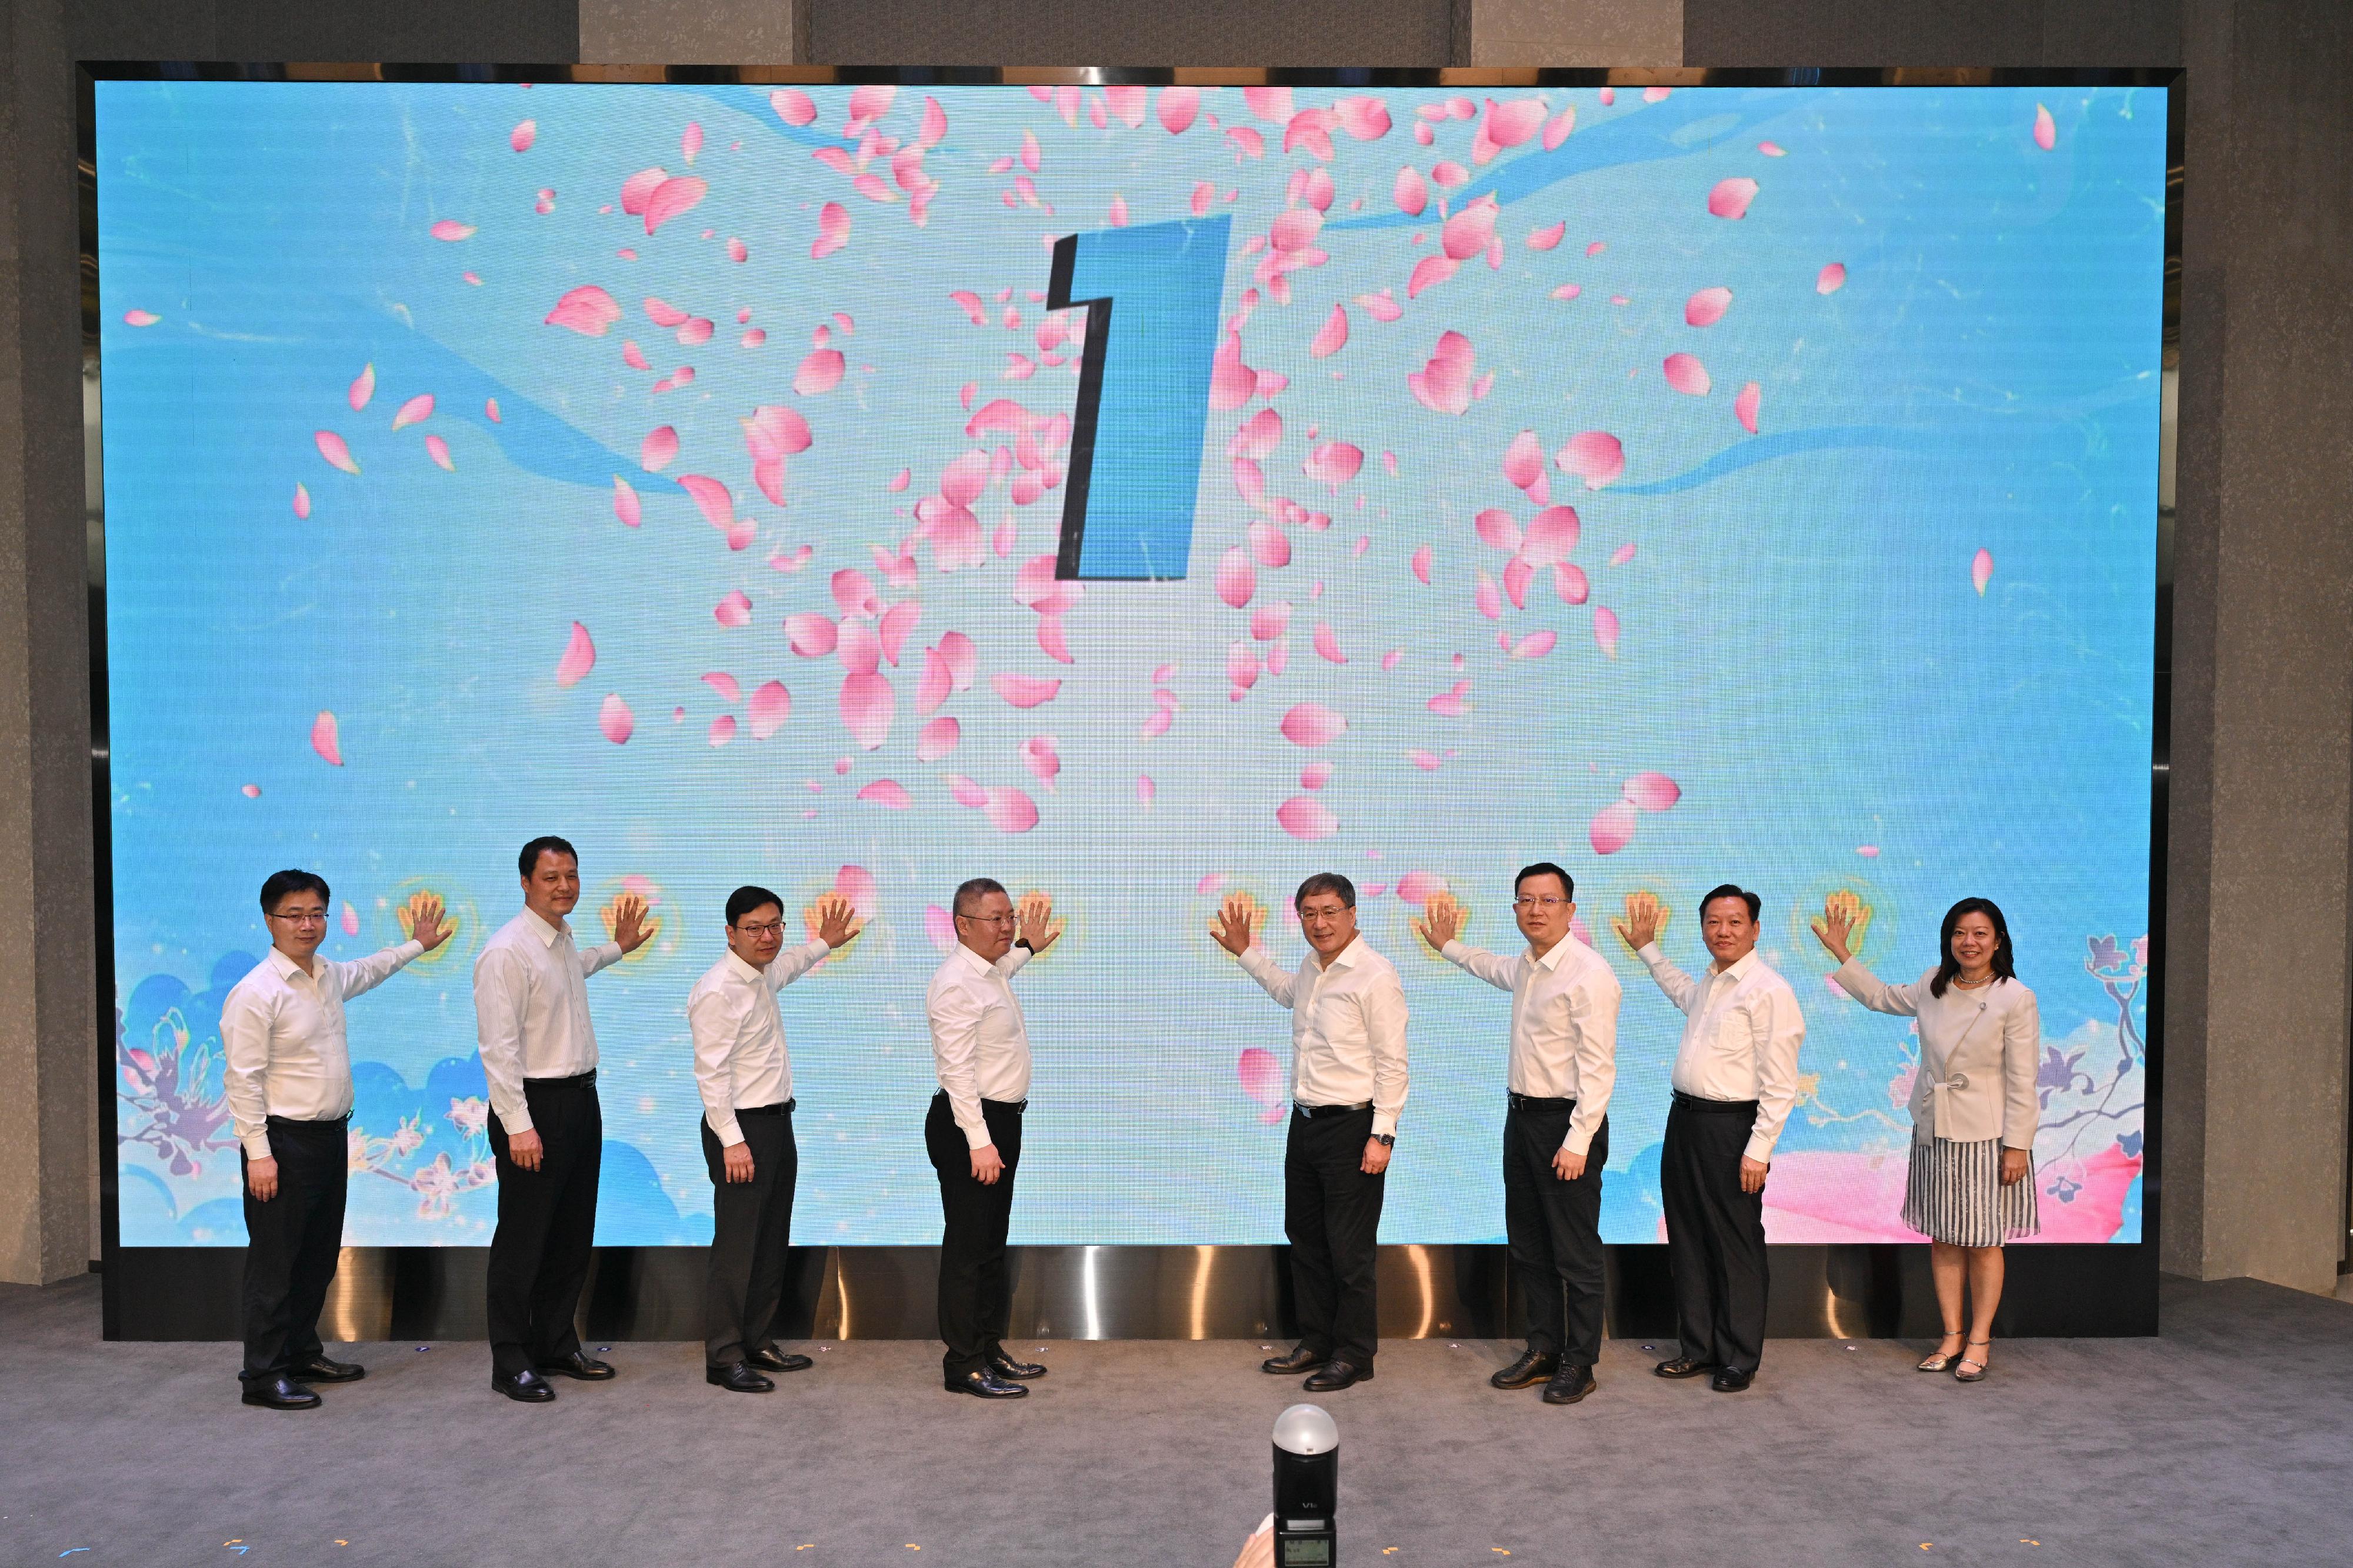 The Deputy Chief Secretary for Administration, Mr Cheuk Wing-hing, attended the Welcoming Ceremony for Young People employed under the Greater Bay Area Youth Employment Scheme in Guangzhou today (September 13). Photo shows Mr Cheuk (fourth right); Deputy Secretary General of People’s Government of Guangdong Province Mr Sun Zhe (fourth left); the Director-General of the Human Resources and Social Security Department of Guangdong Province, Mr Du Minqi (third right); the Secretary for Labour and Welfare, Mr Chris Sun (third left); and the Commissioner for Labour, Ms May Chan (first right), officiating at the lighting ceremony.